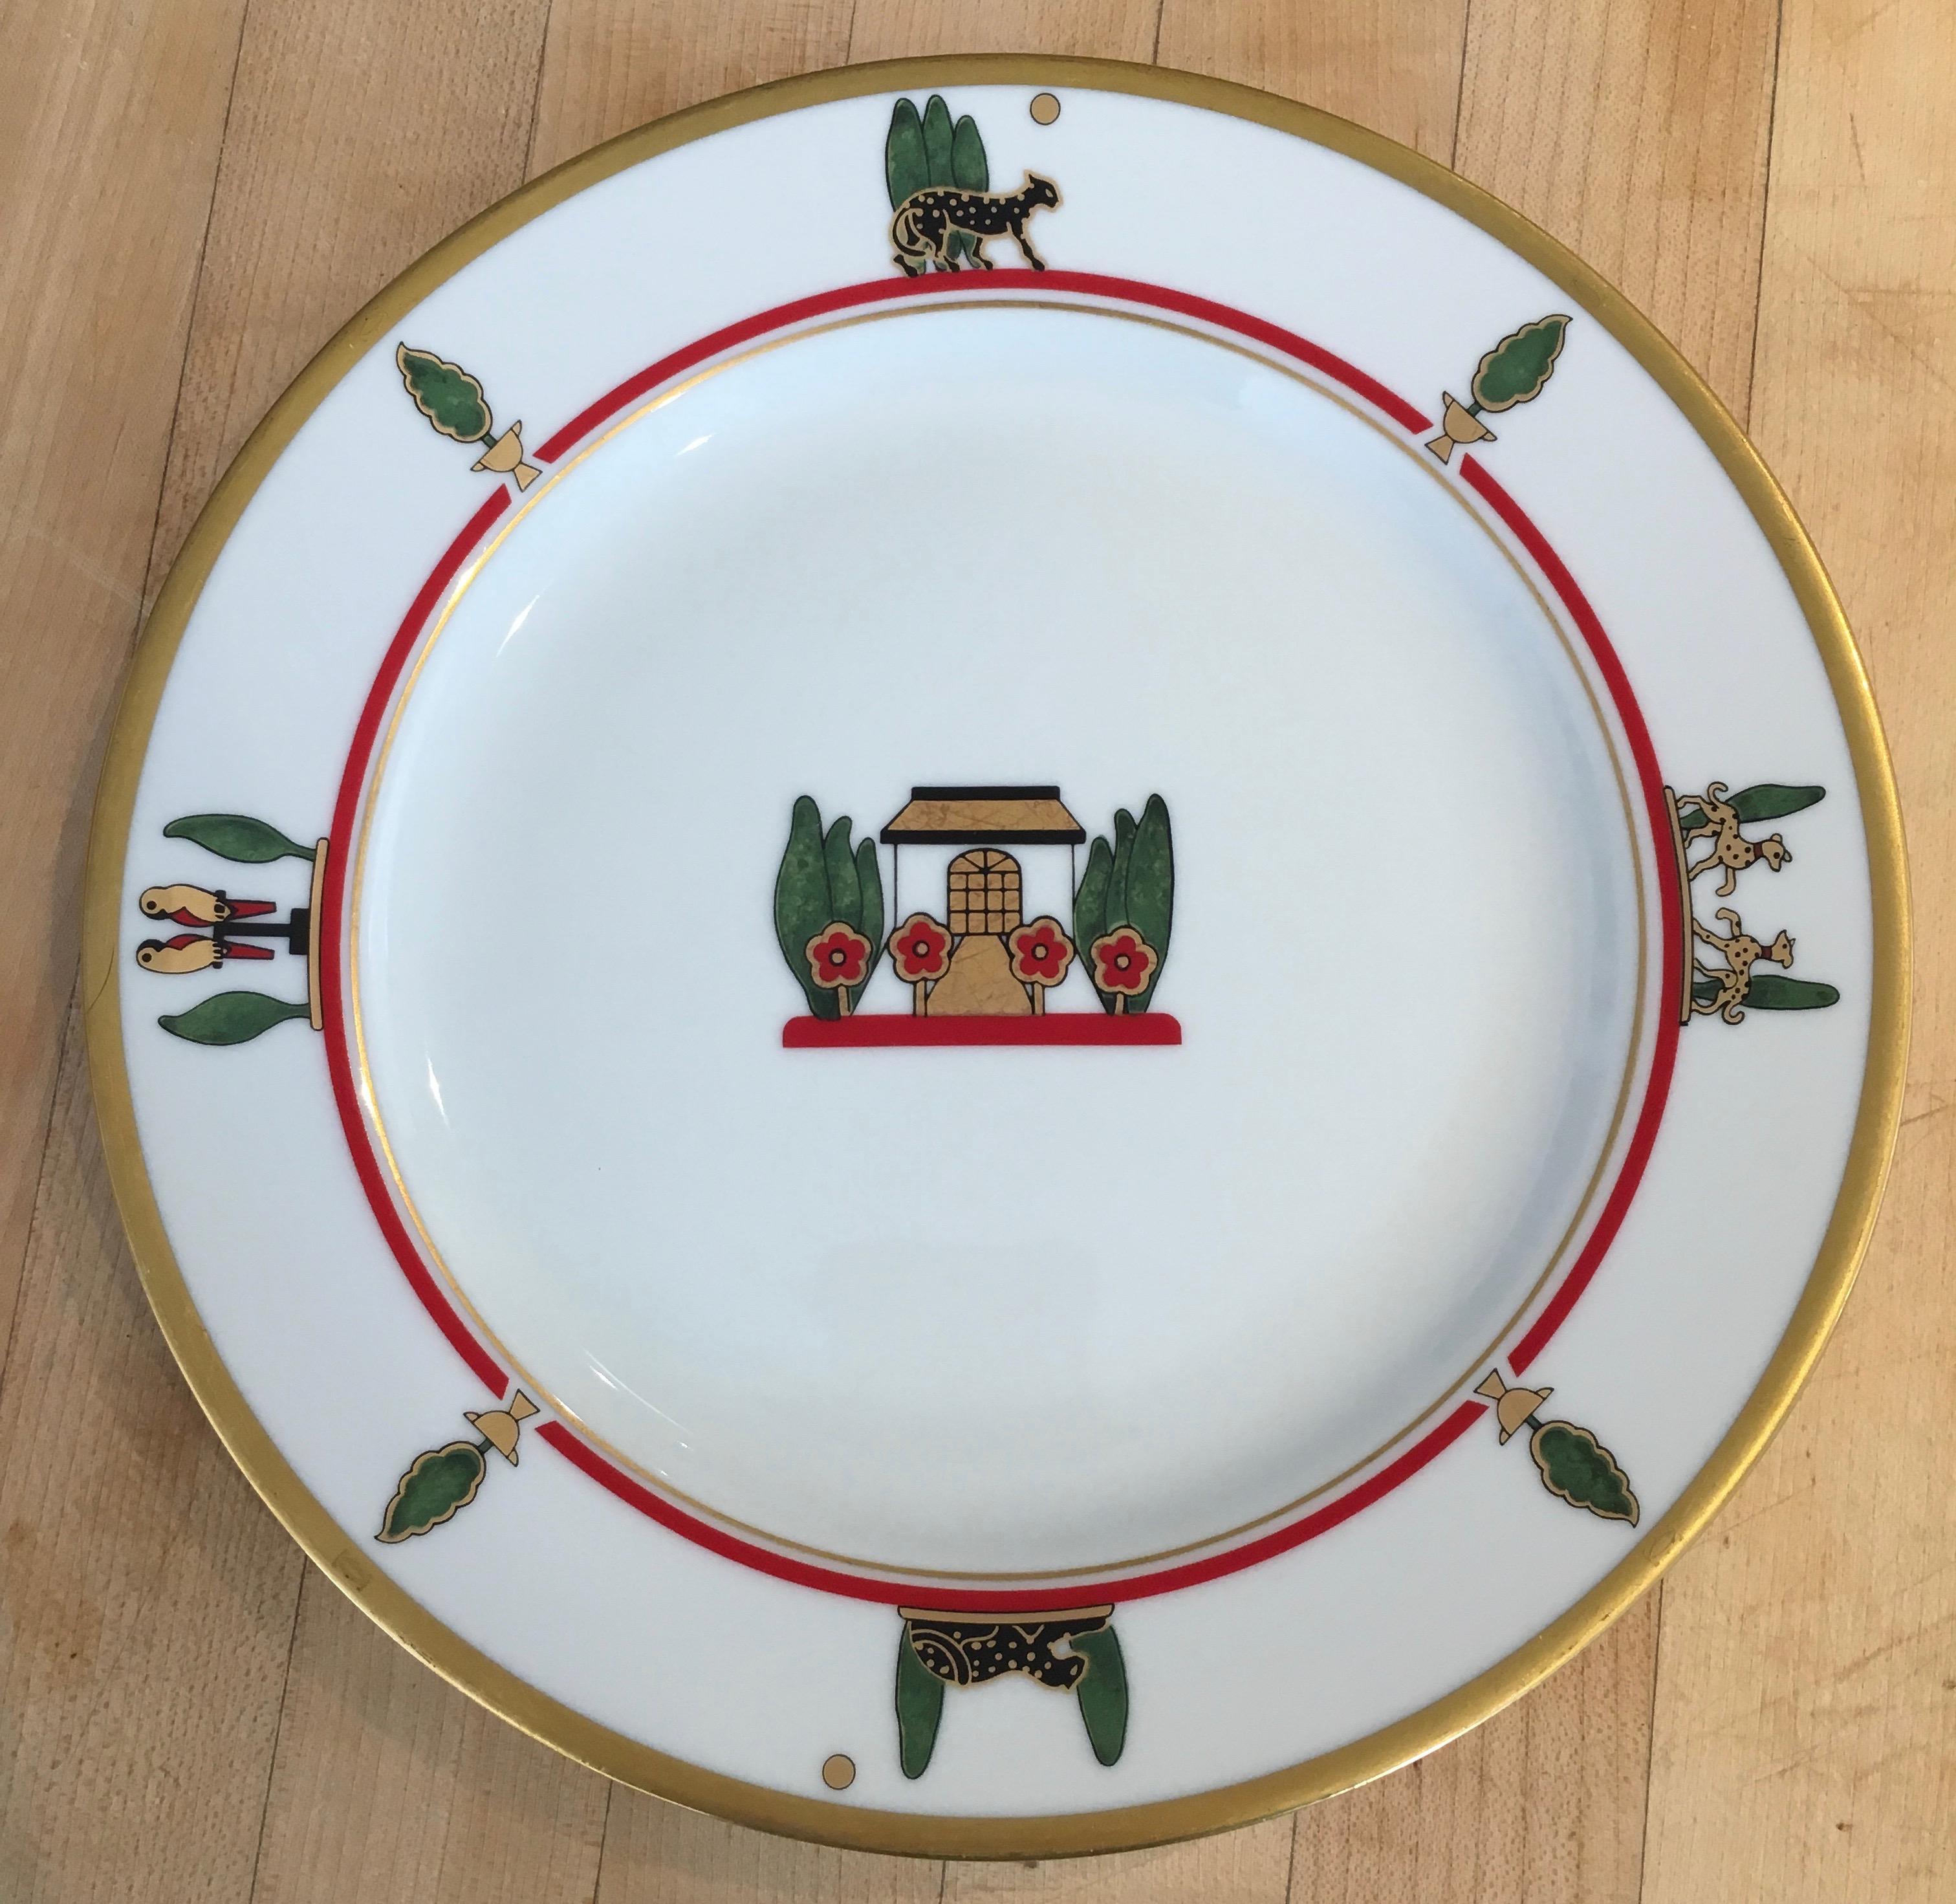 Cartier salad or dessert plates. Featuring gold rim and detail, the iconic Cartier black panther, red inner band and green topiaries, animalia; 1980s Cartier and Limoges France collaboration.
 